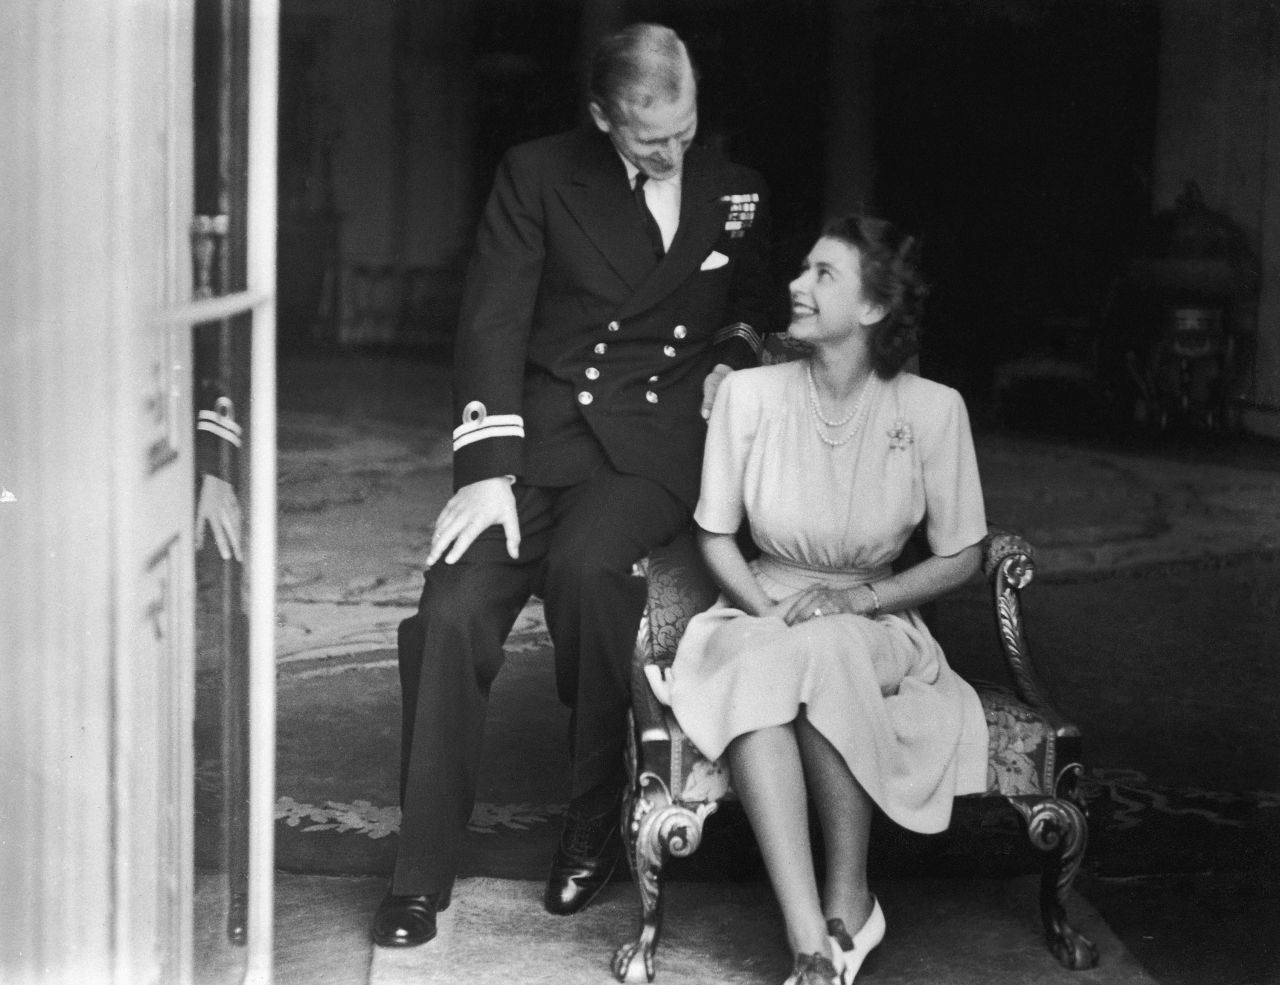 Prince Philip sits with his fiancee, Princess Elizabeth, in July 1947. He had become a naturalized British citizen and a commoner, using the surname Mountbatten, an English translation of his mother's maiden name. He was also an officer of the British Royal Navy and fought in World War II.